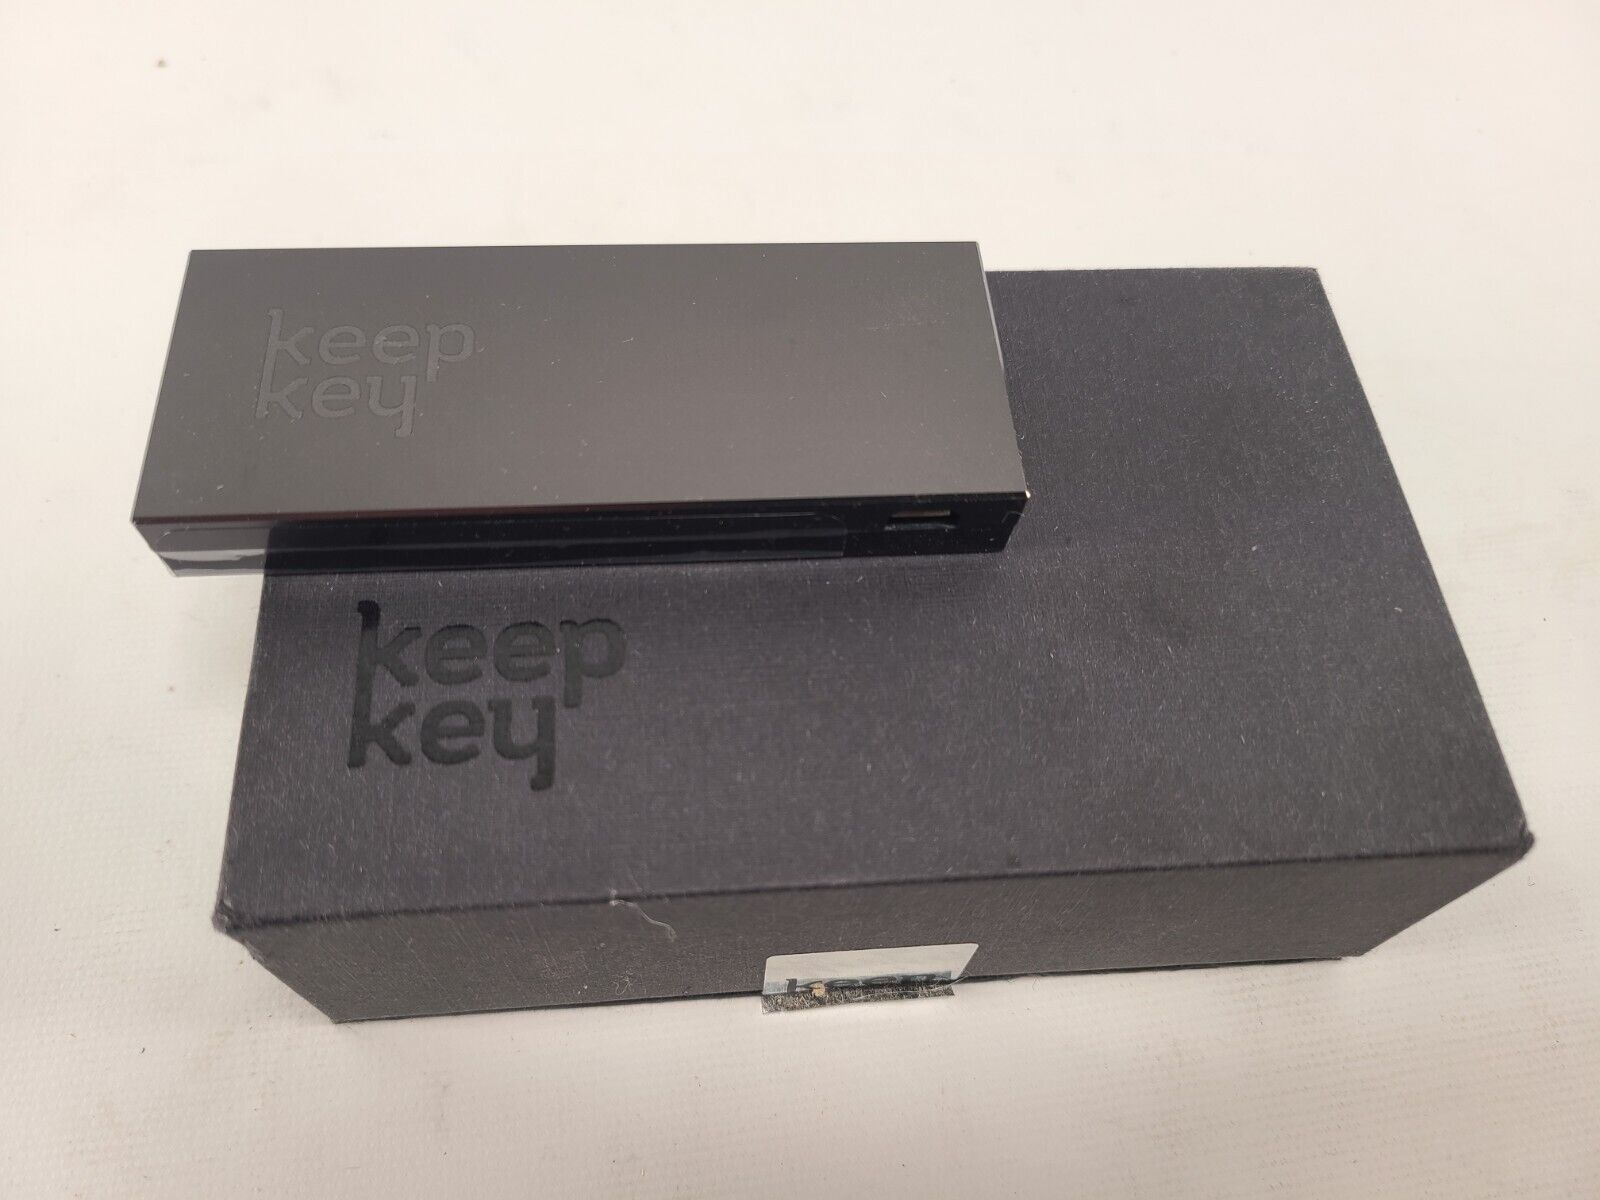 Keep key The Simple Cryptocurrency Hardware Wallet Black 